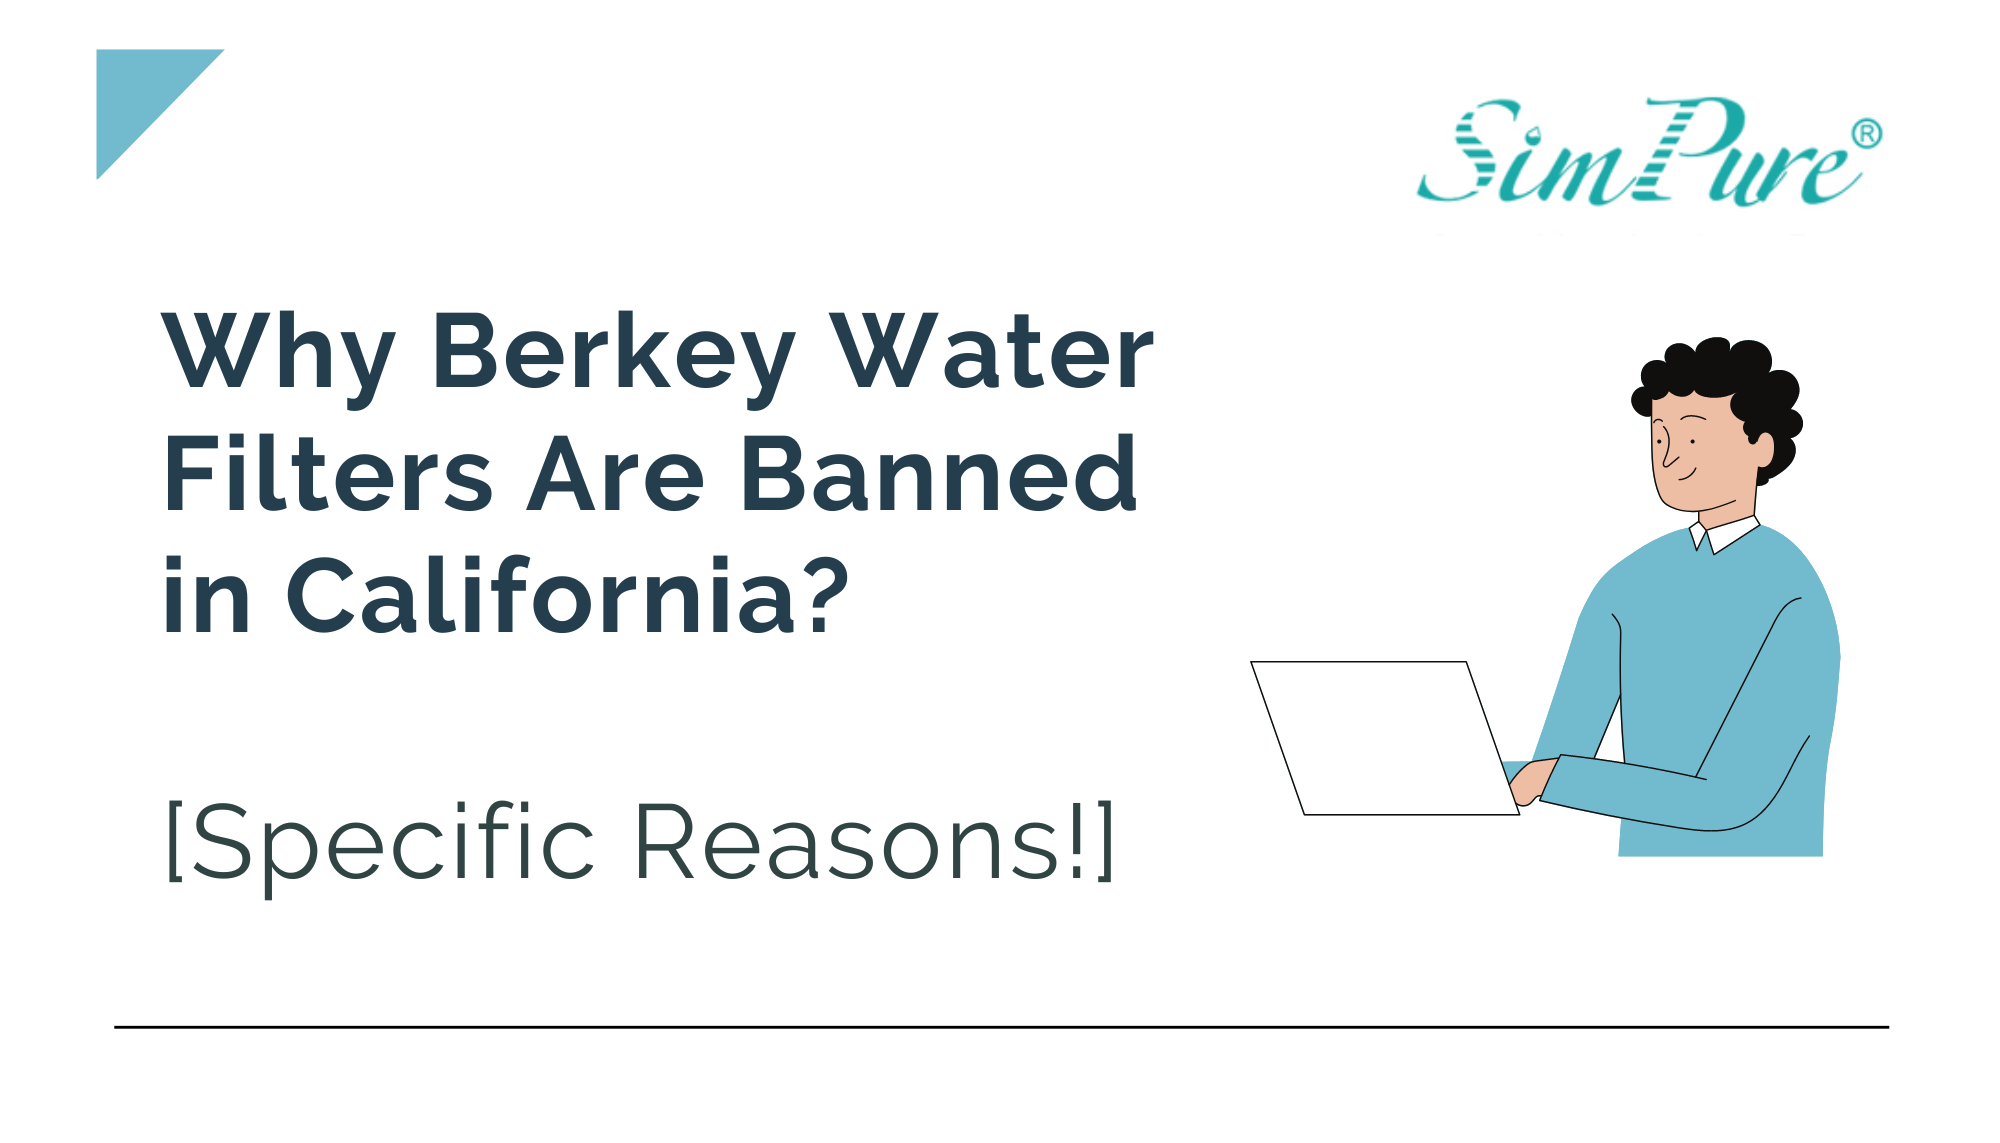 California Has a Ban on Berkey Water Filters — But Why?